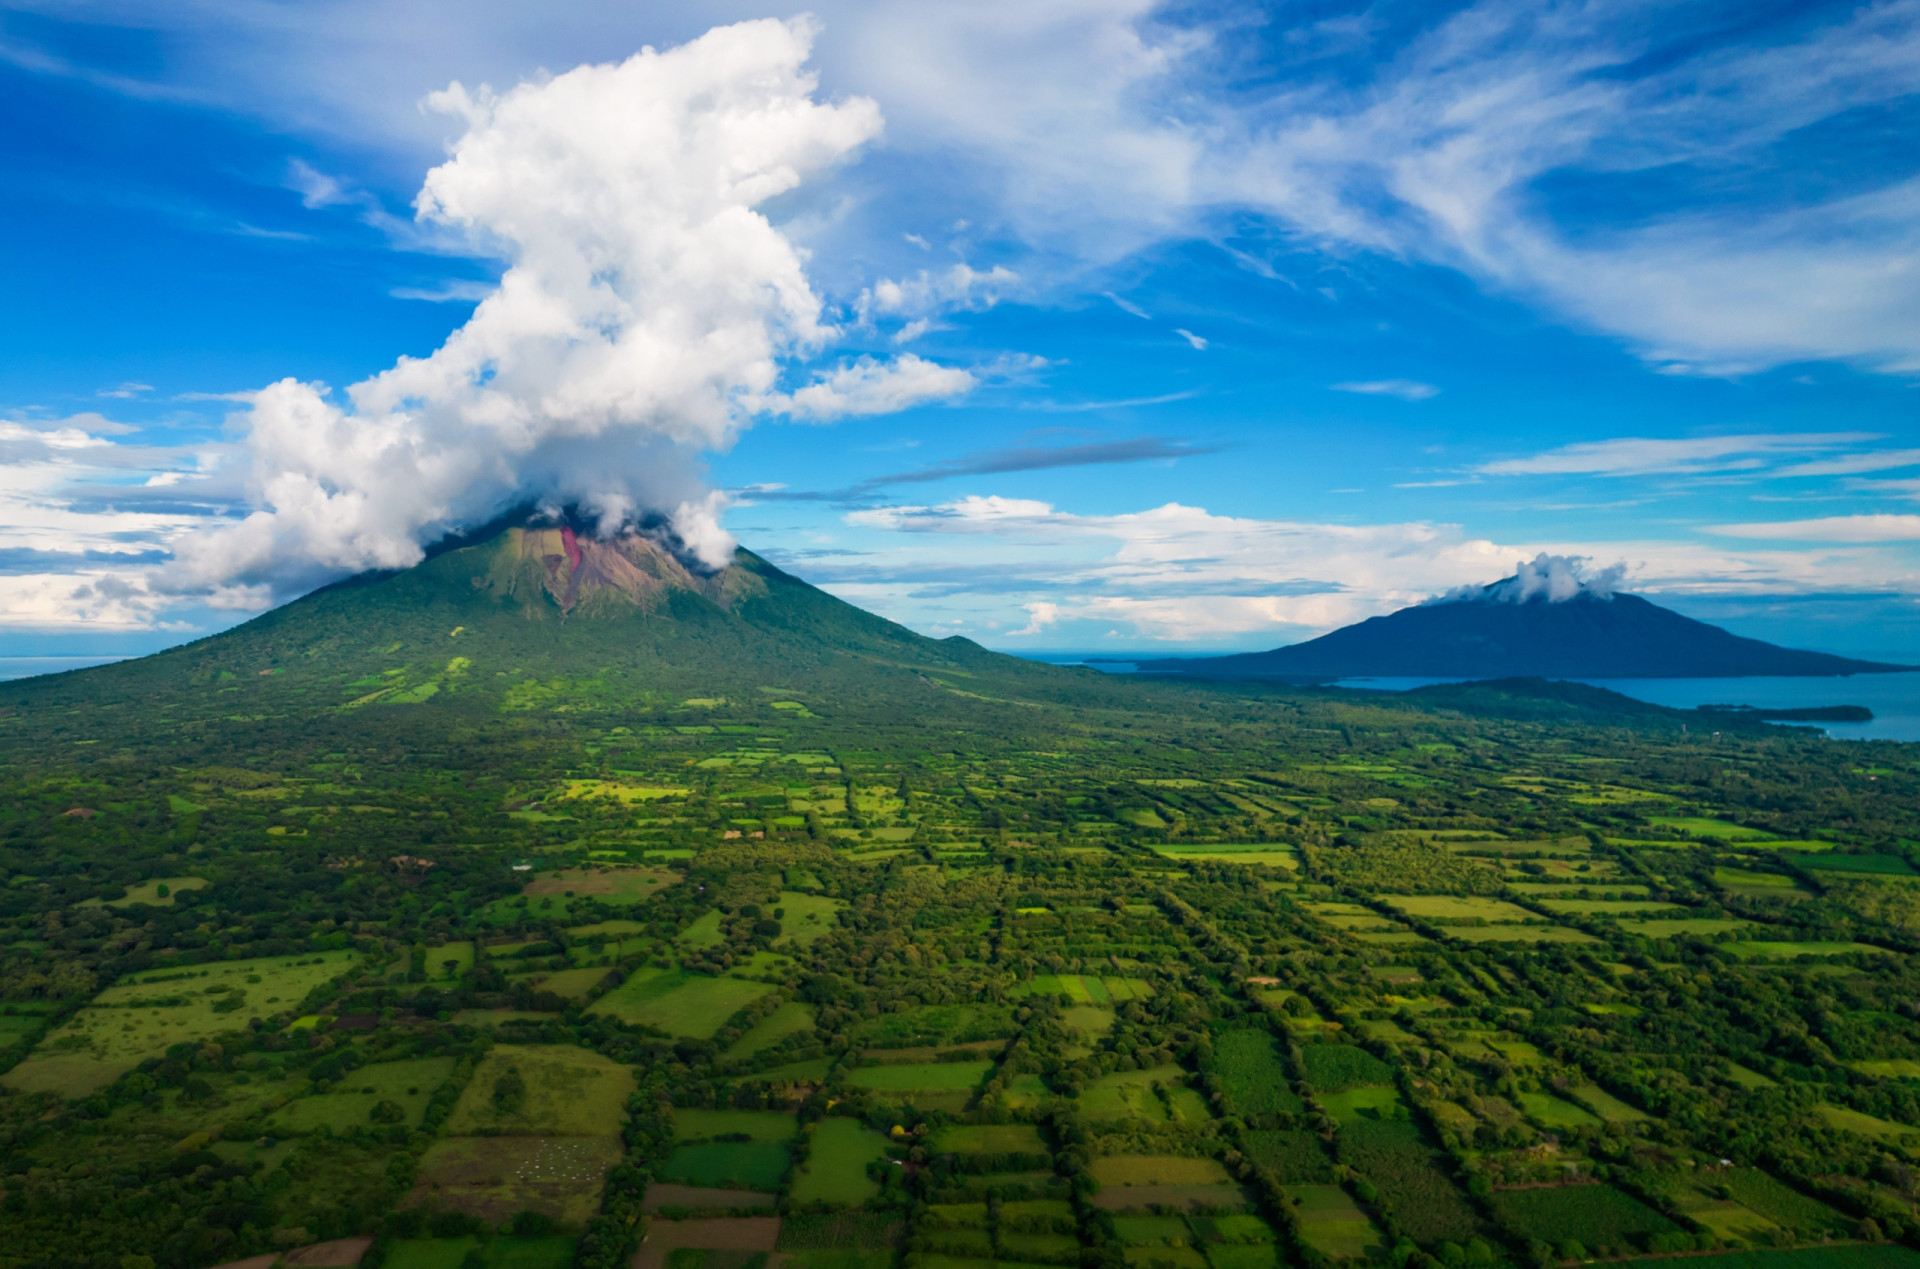 <p>Seasoned travelers to Nicaragua rate Ometepe Island as among the most impressive destinations in the country. And for newcomers, this extraordinary island with its towering twin volcanoes set within a vast lake serves as an ideal introduction to this Central American nation.</p>